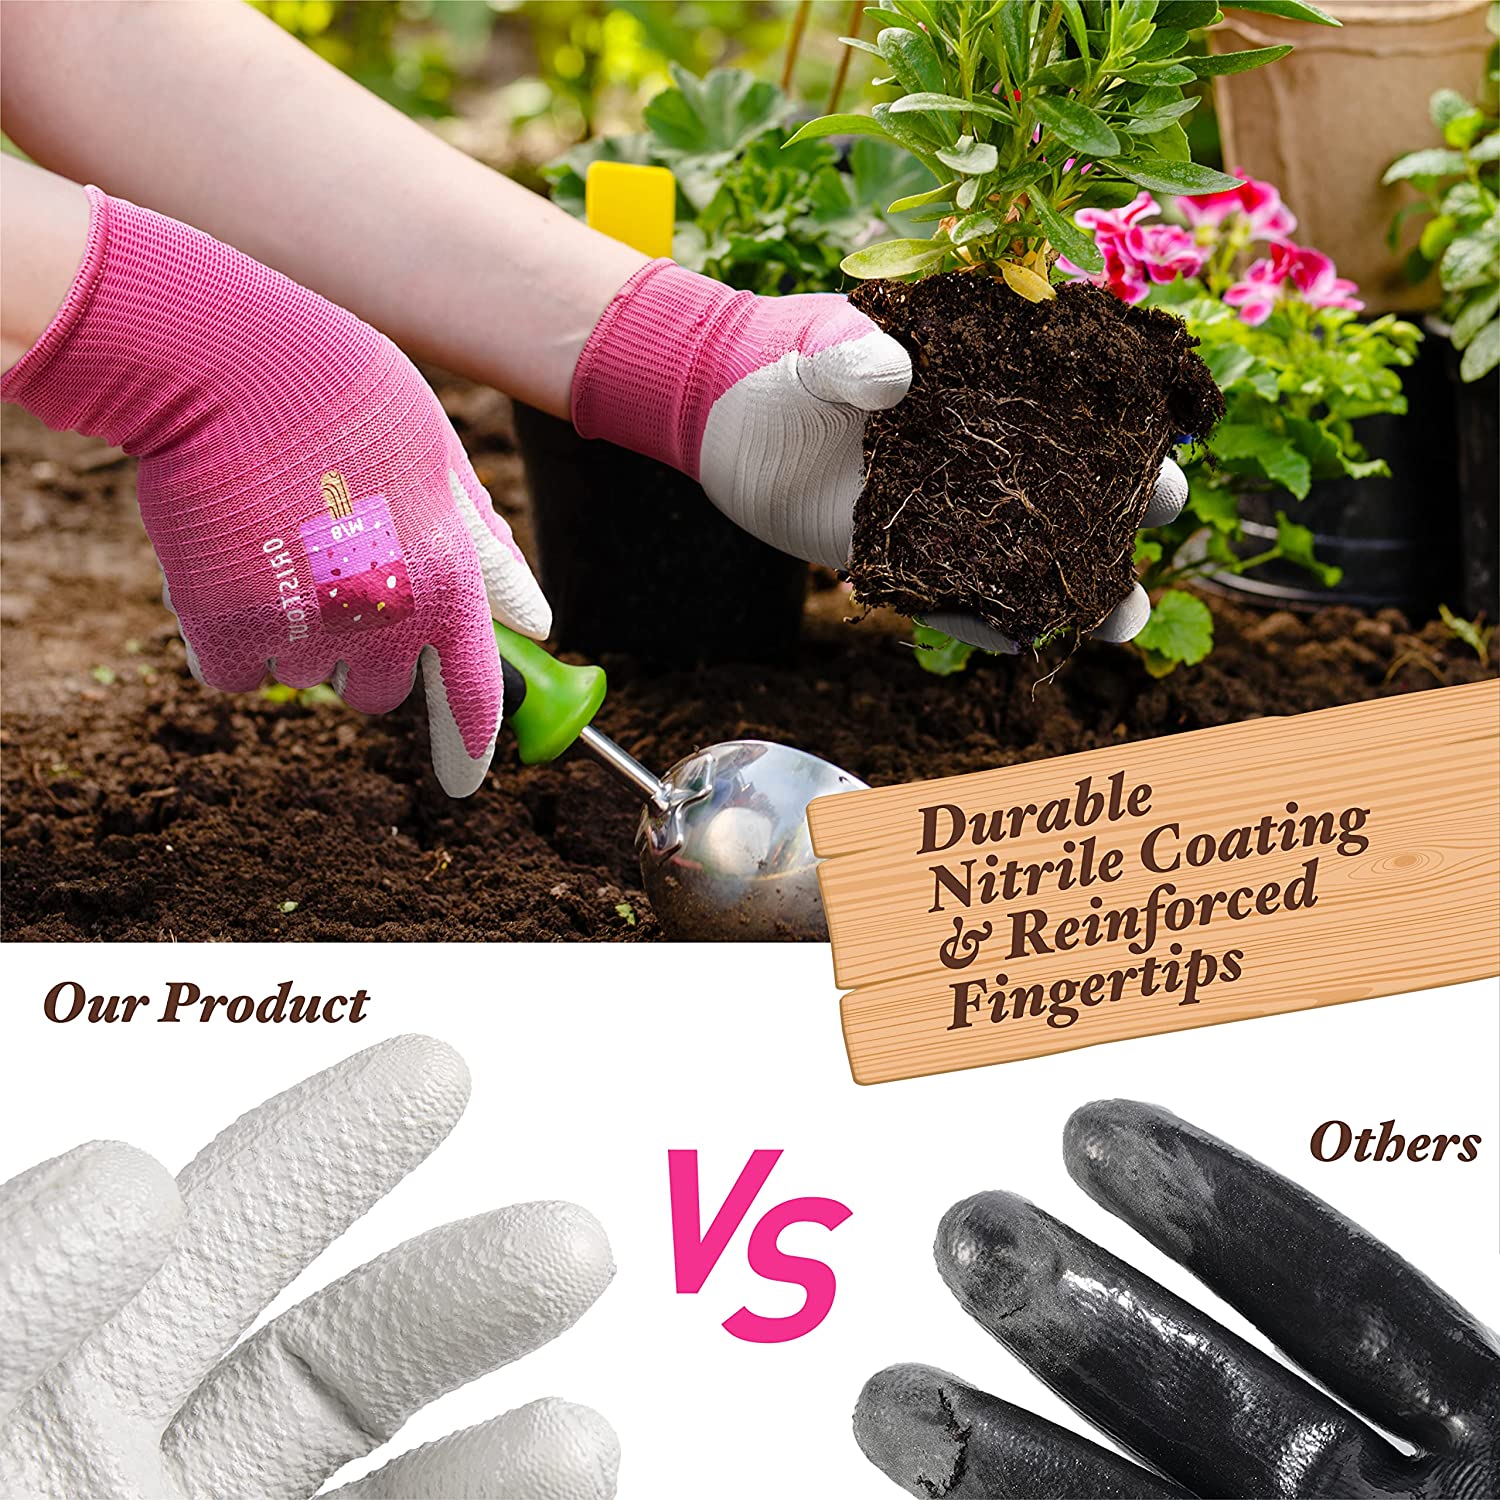 3/12 Pairs Value Pack Gardening Gloves, Lightweight & Waterproof for Day-long Wearing